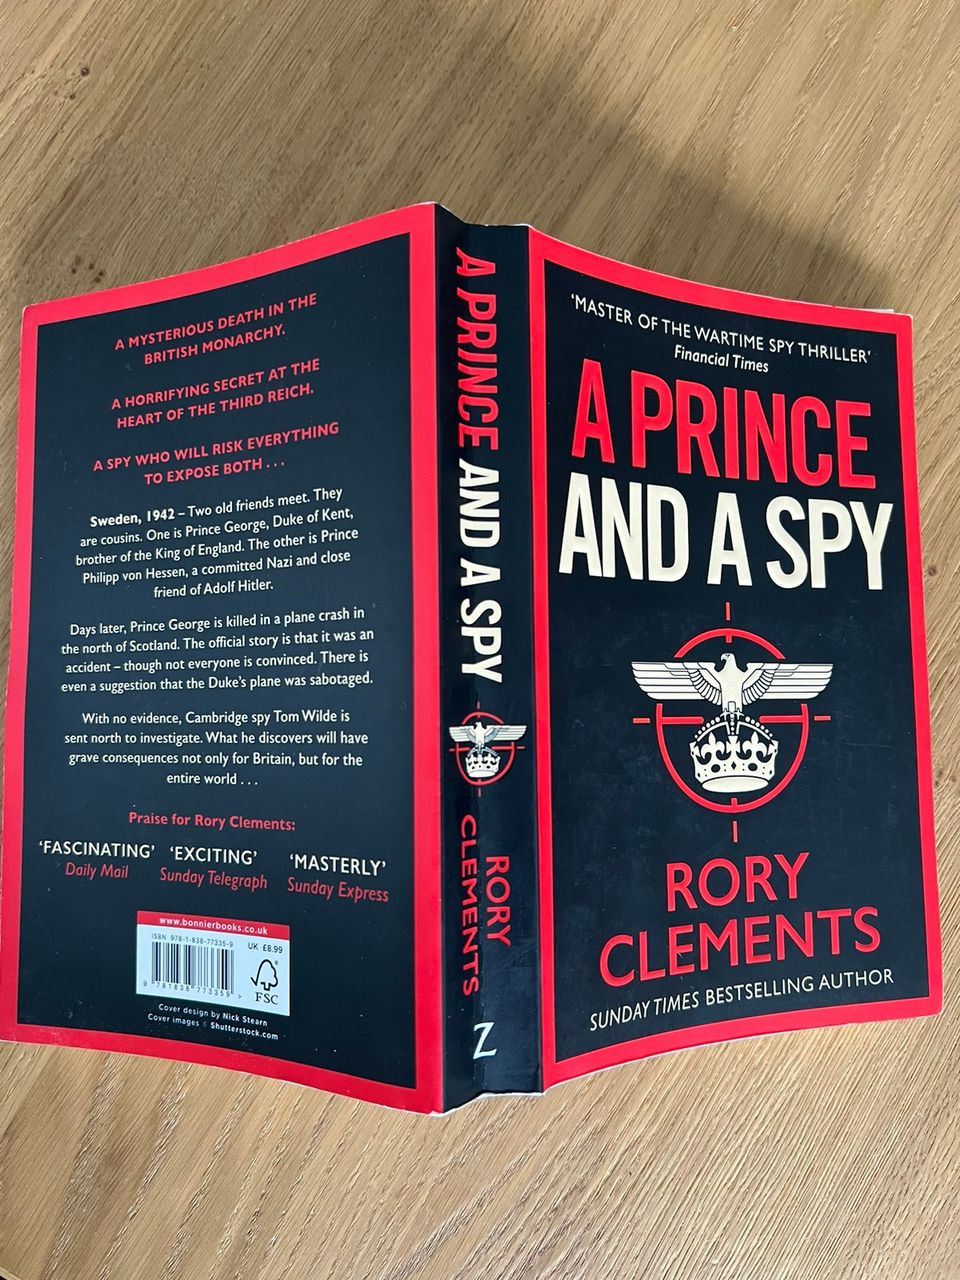 Prince and a Spy by Rory Clements